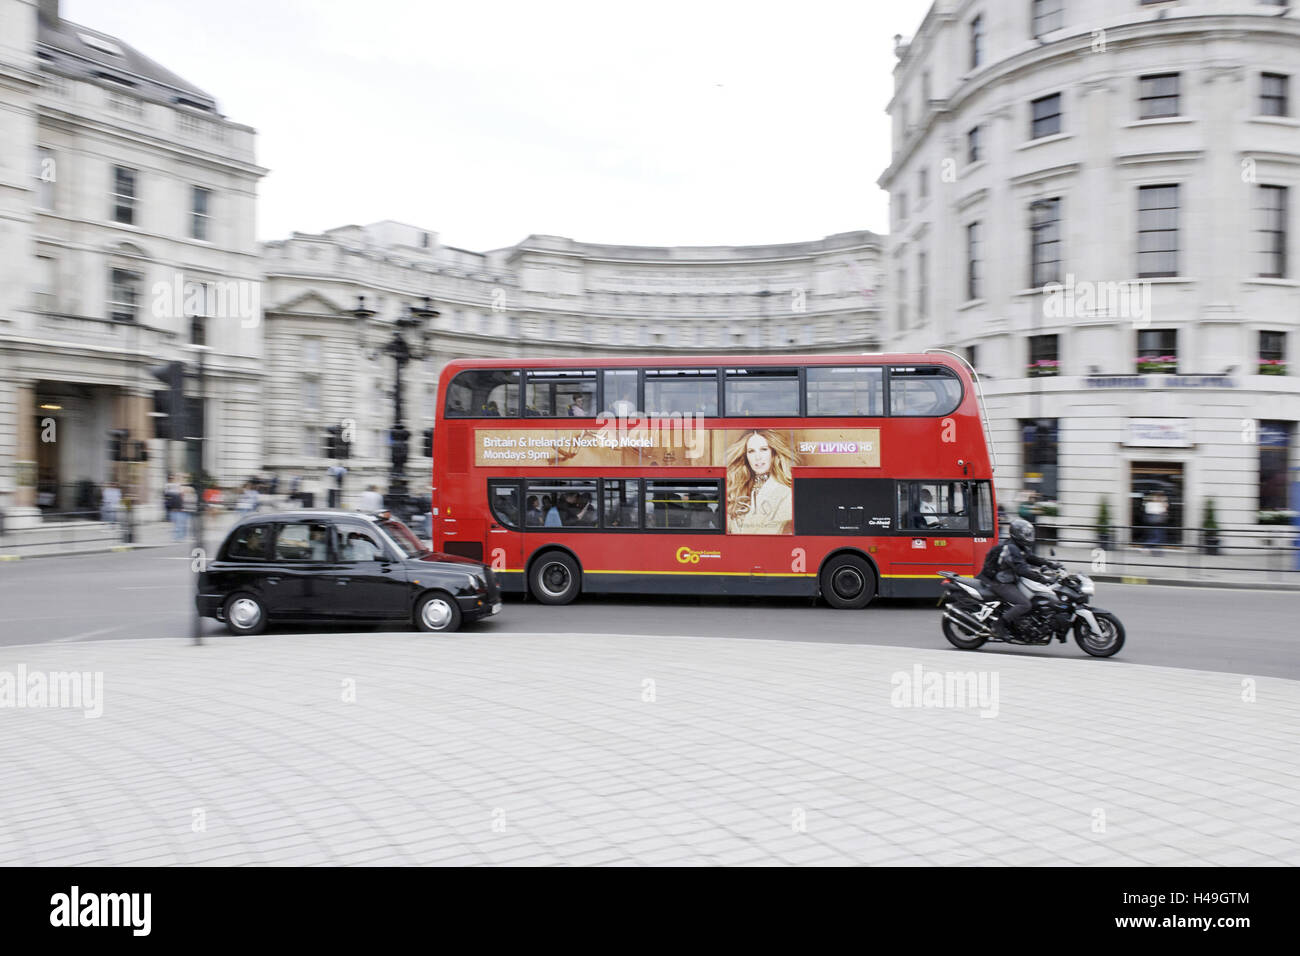 Street scene, red double-decker bus, roundabout, Charing Cross, Trafalgar Square, City of Westminster, London, England, UK, Stock Photo